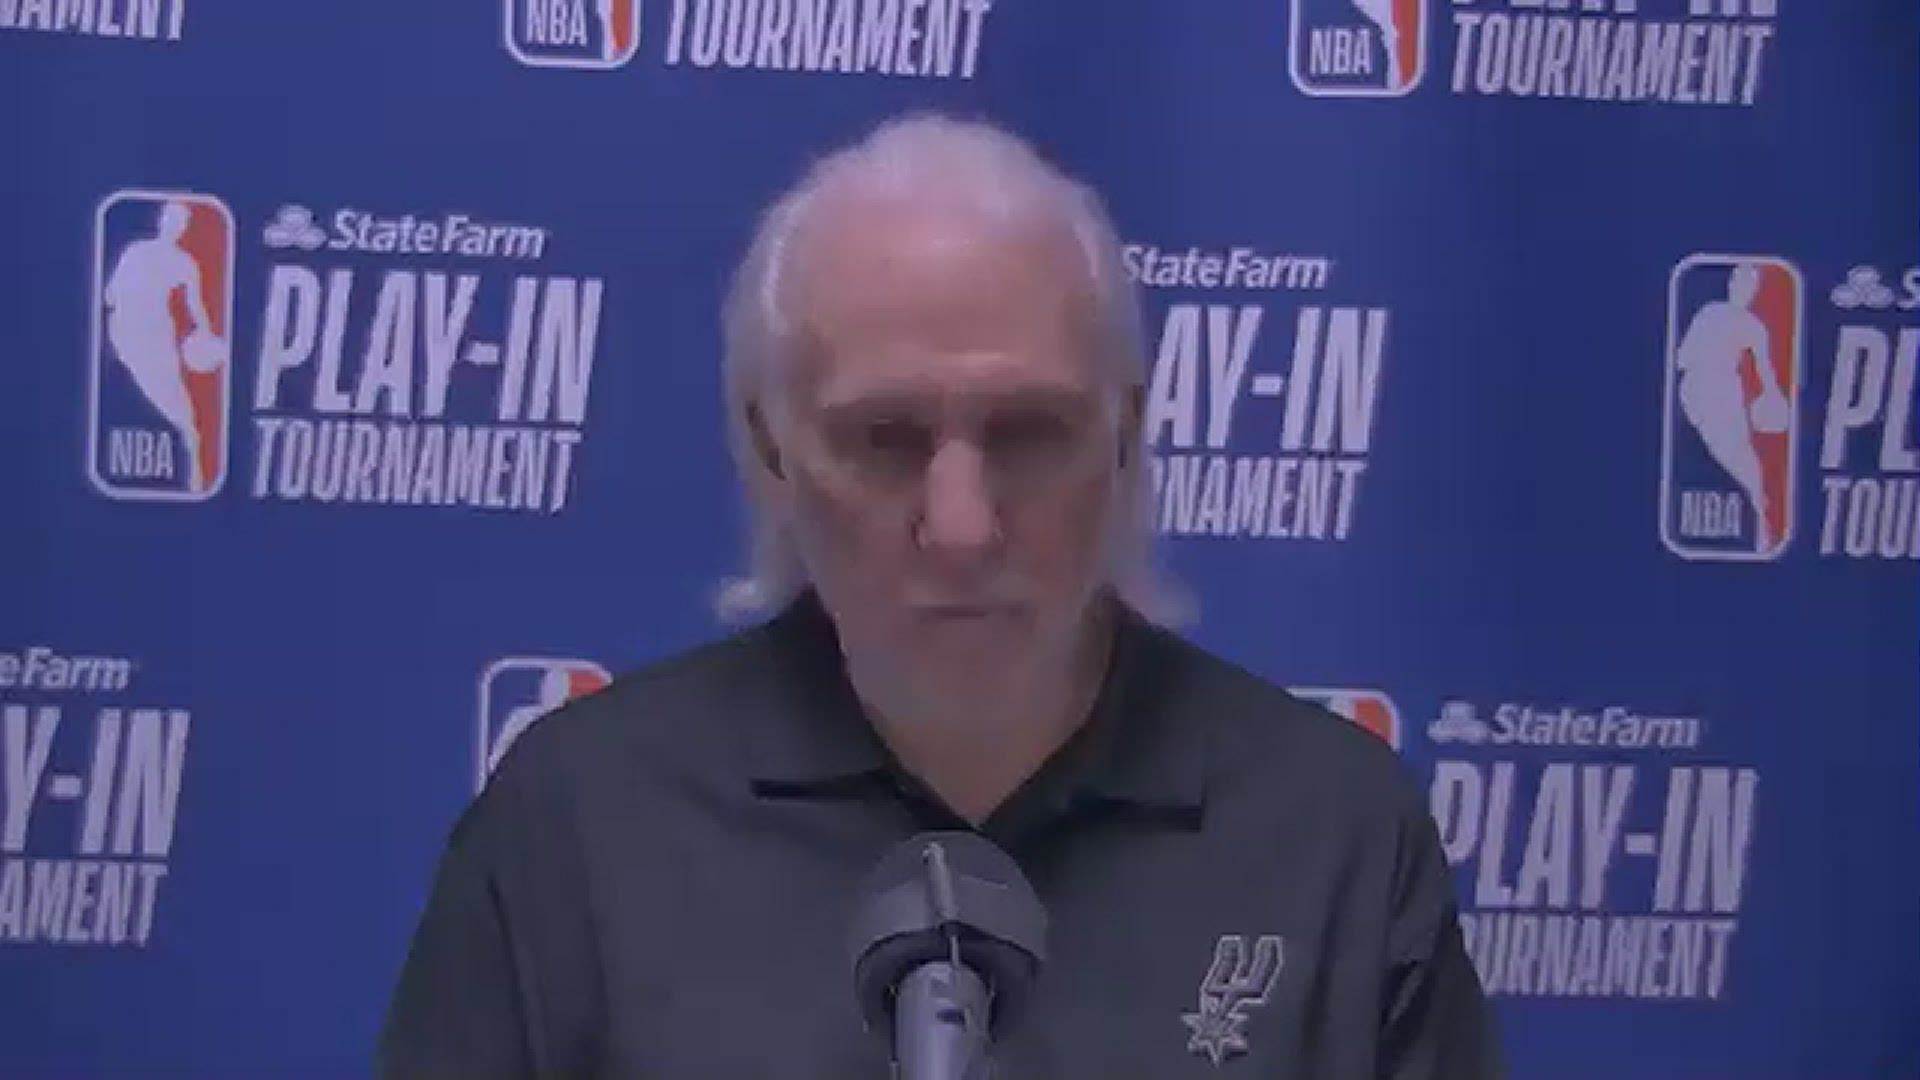 "I don't know if I've ever been more proud of a team that just doesn't quit," Popovich said after the Spurs erased a 21-point deficit but couldn't close out the win.